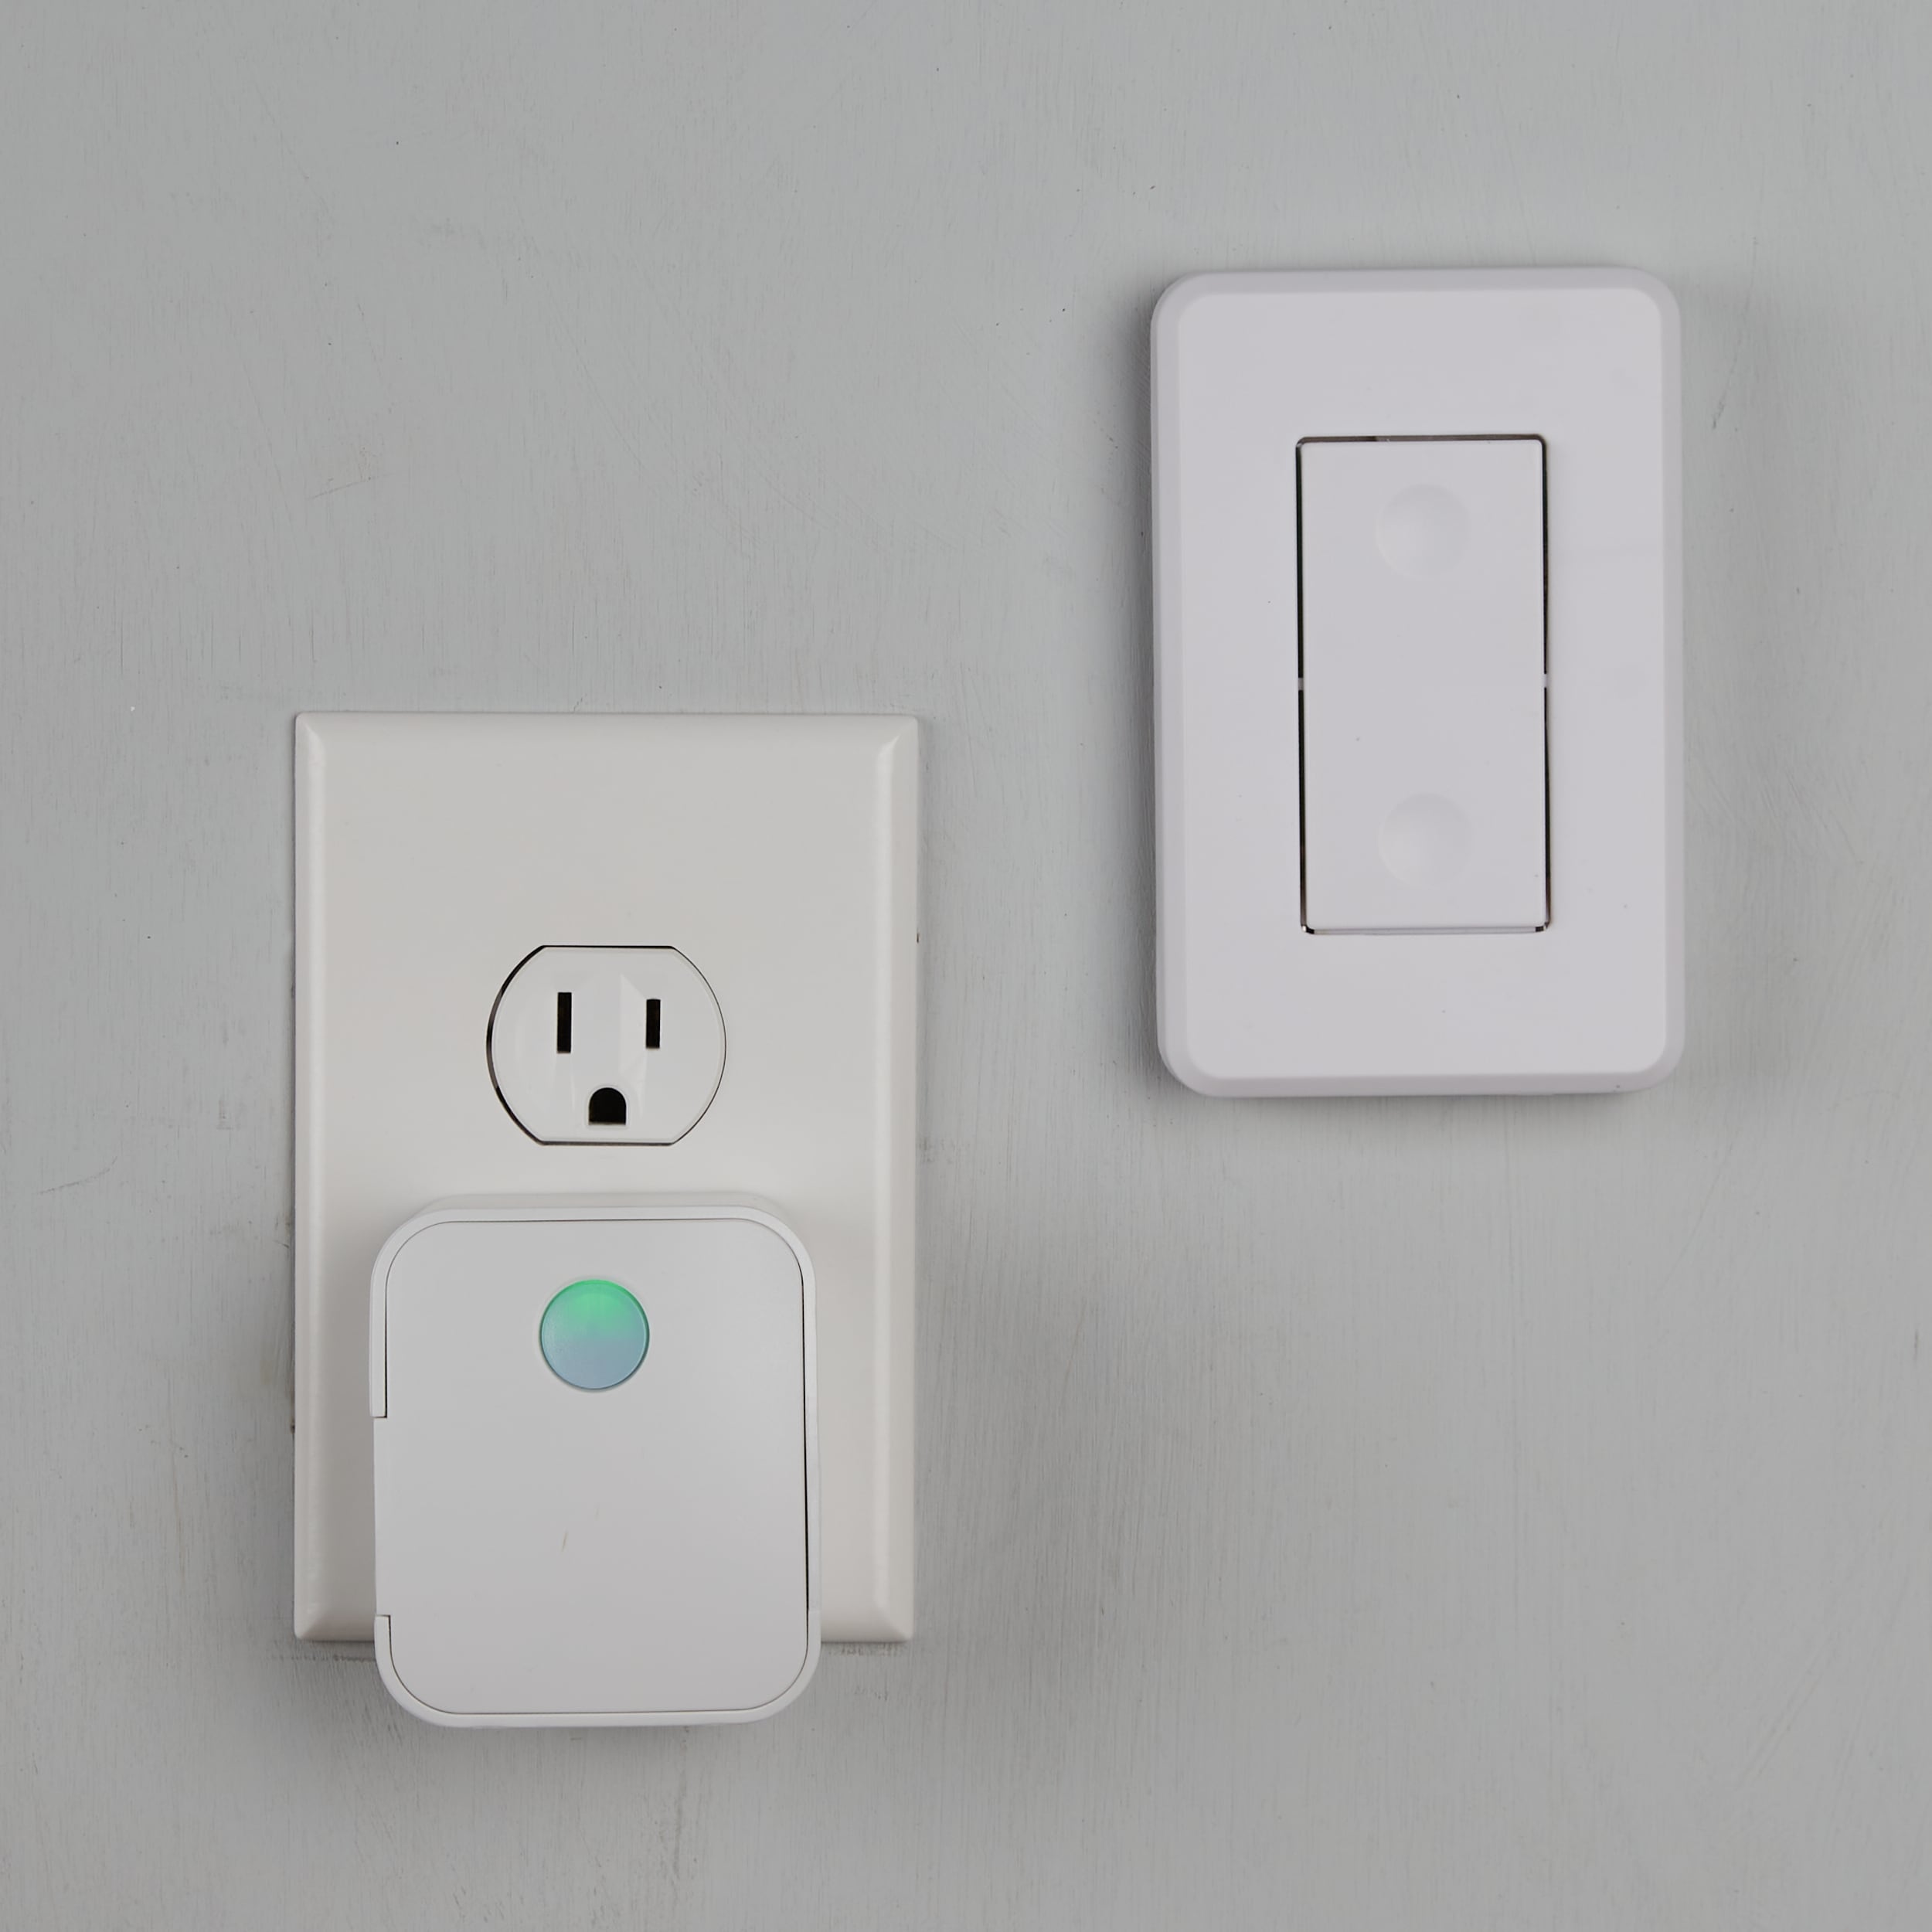 Remote Control Outlet, Wireless Detachable Wall Mounted Light